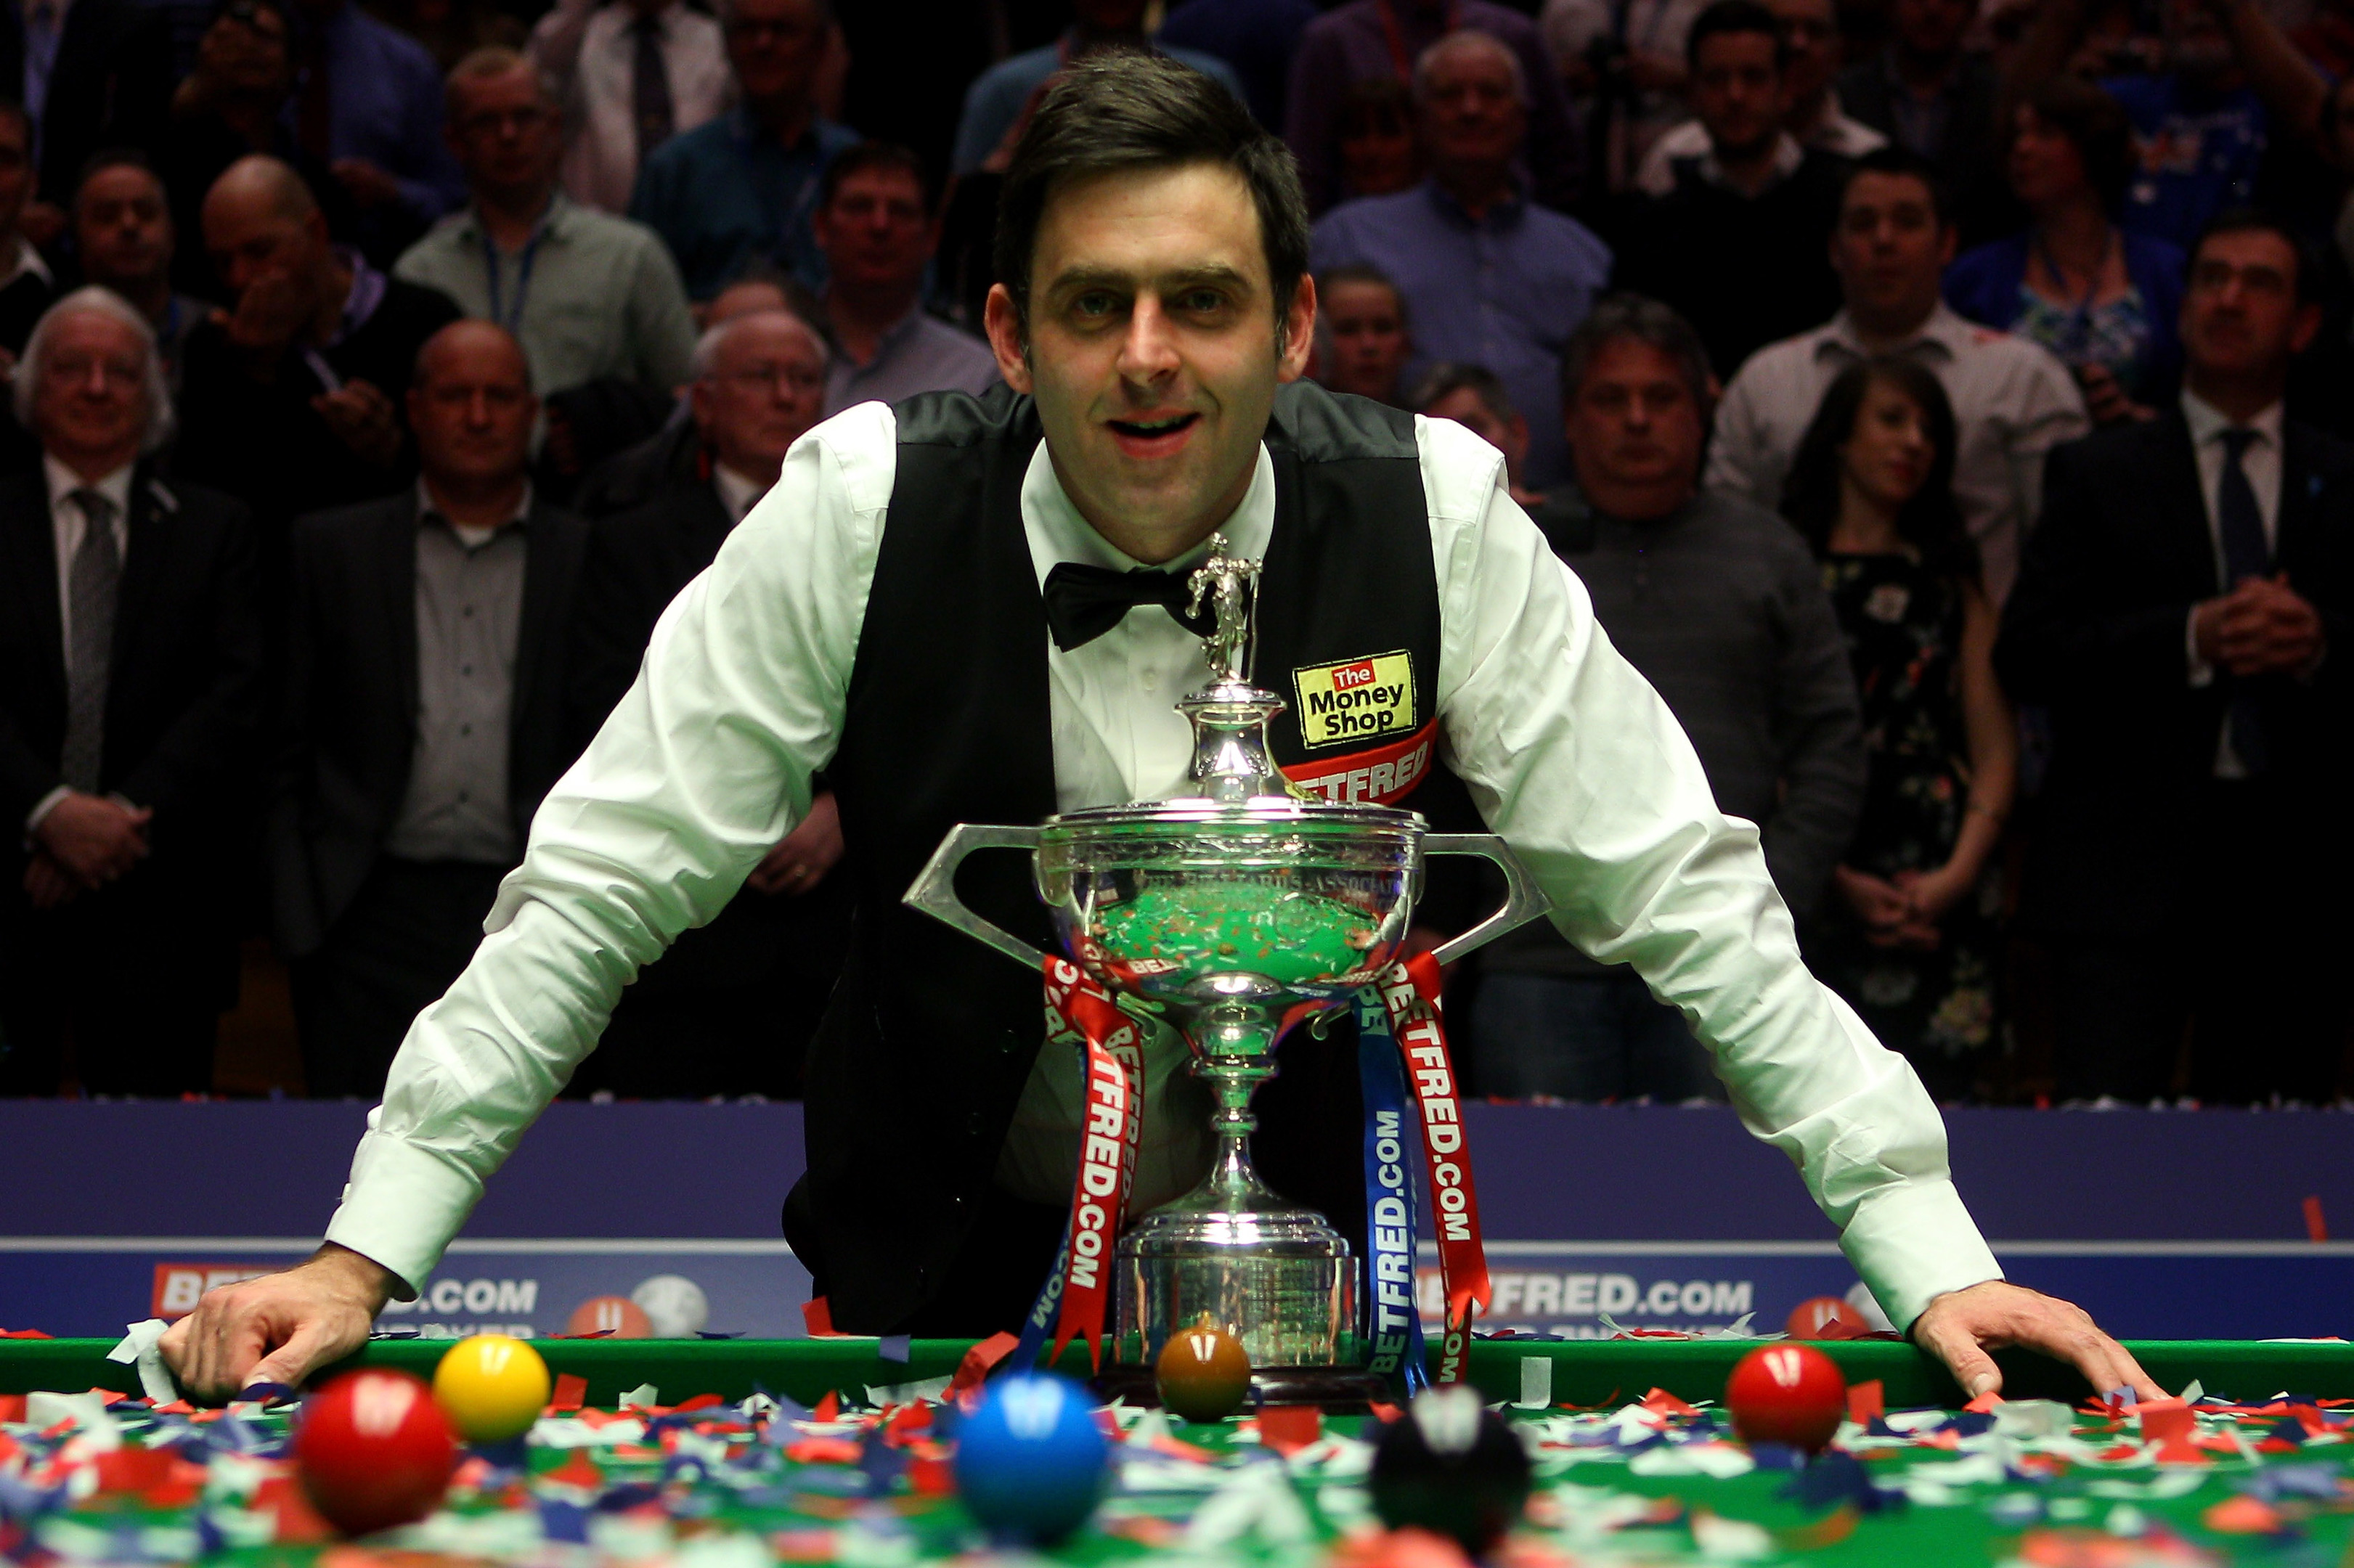 Snooker's enigmatic Ronnie O'Sullivan has published a crime novel Sunday Post